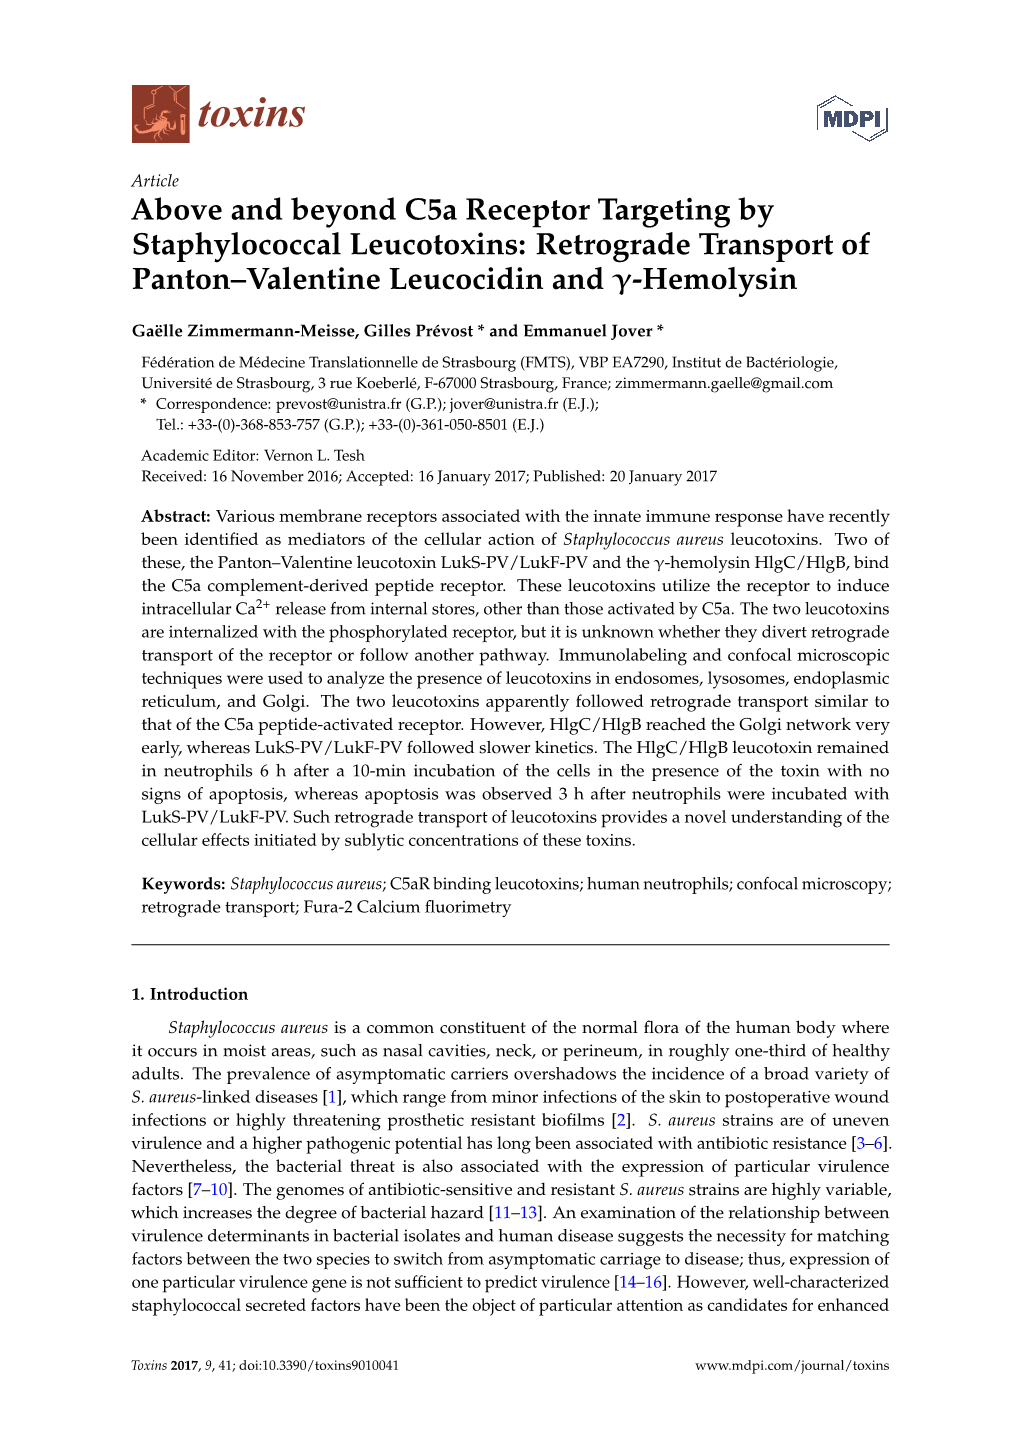 Above and Beyond C5a Receptor Targeting by Staphylococcal Leucotoxins: Retrograde Transport of Panton–Valentine Leucocidin and Γ-Hemolysin